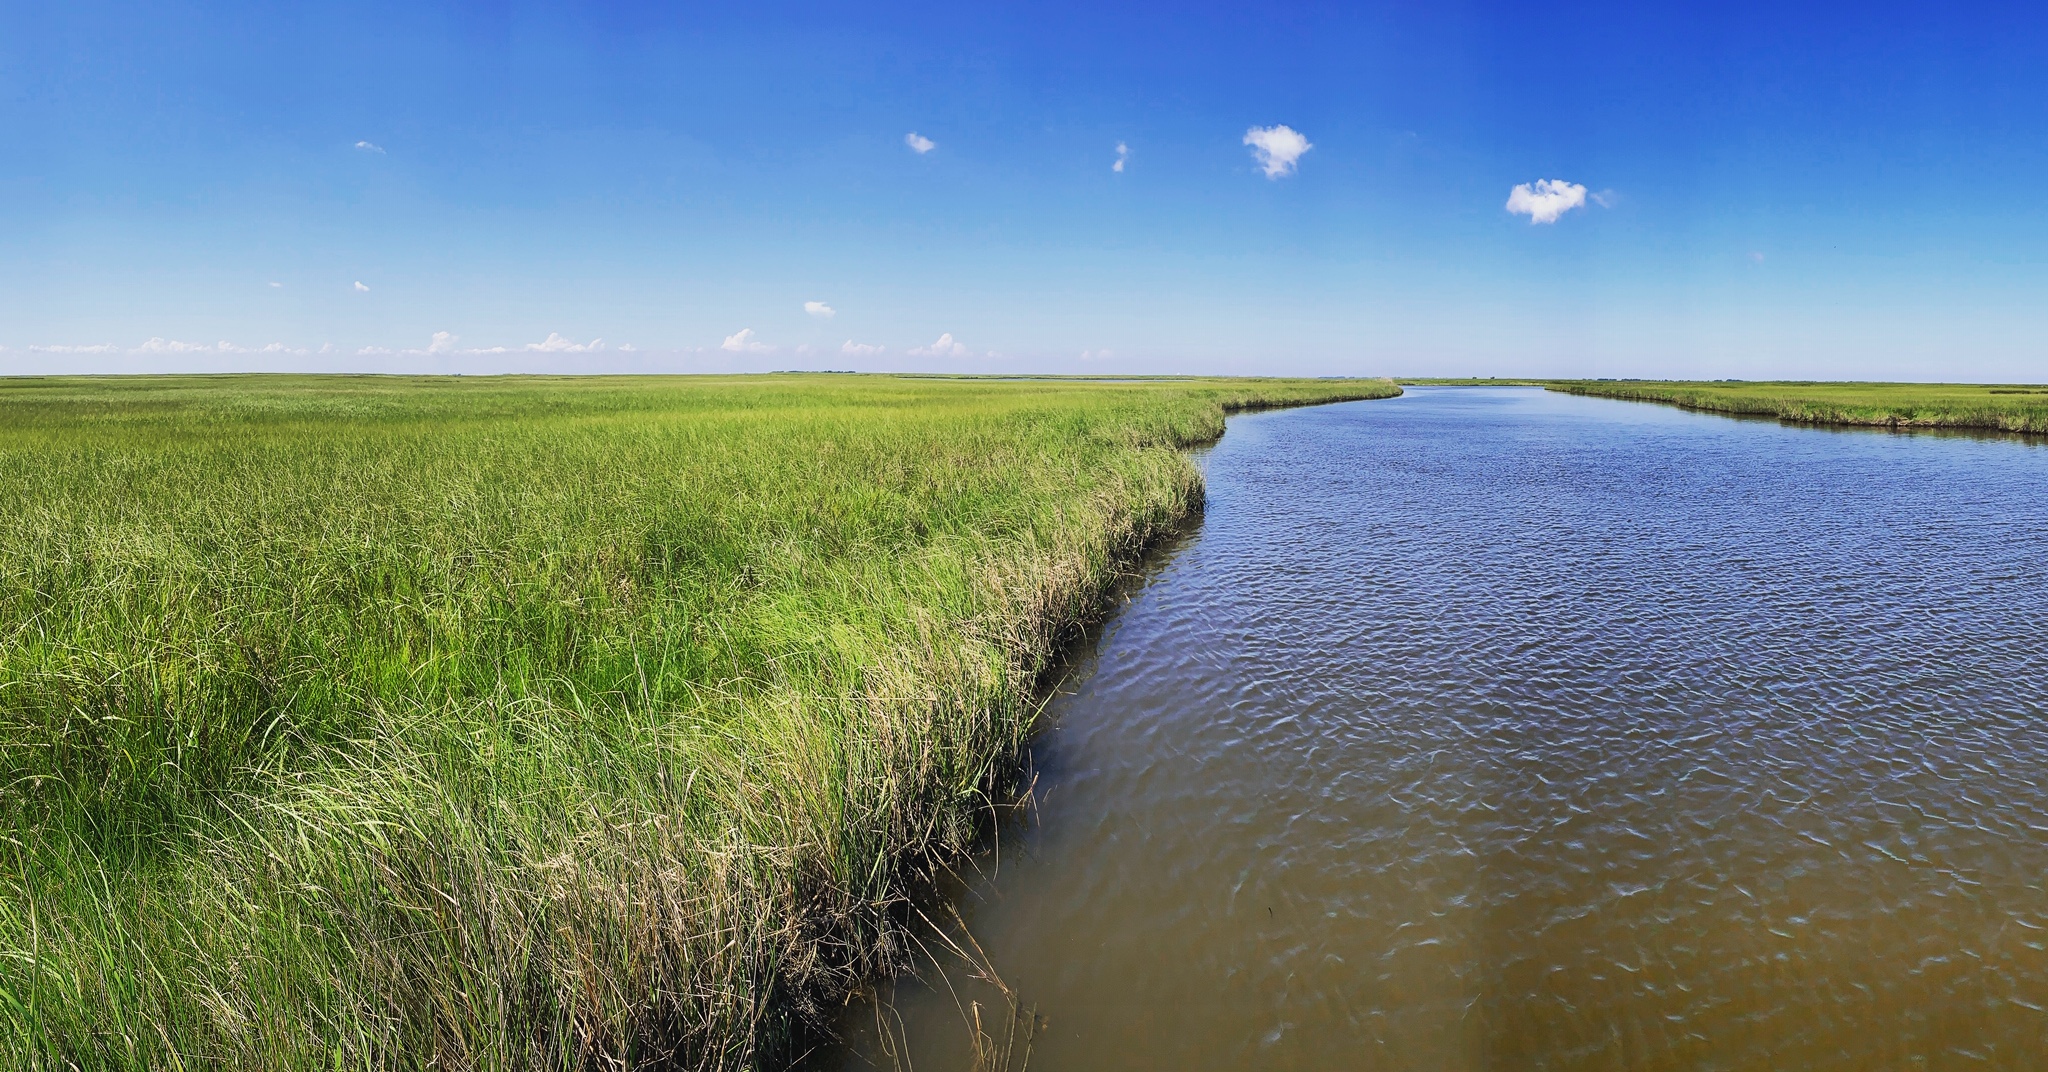 Salt marshes support a productive ecosystem and food web. Photo credit: A. McDonald